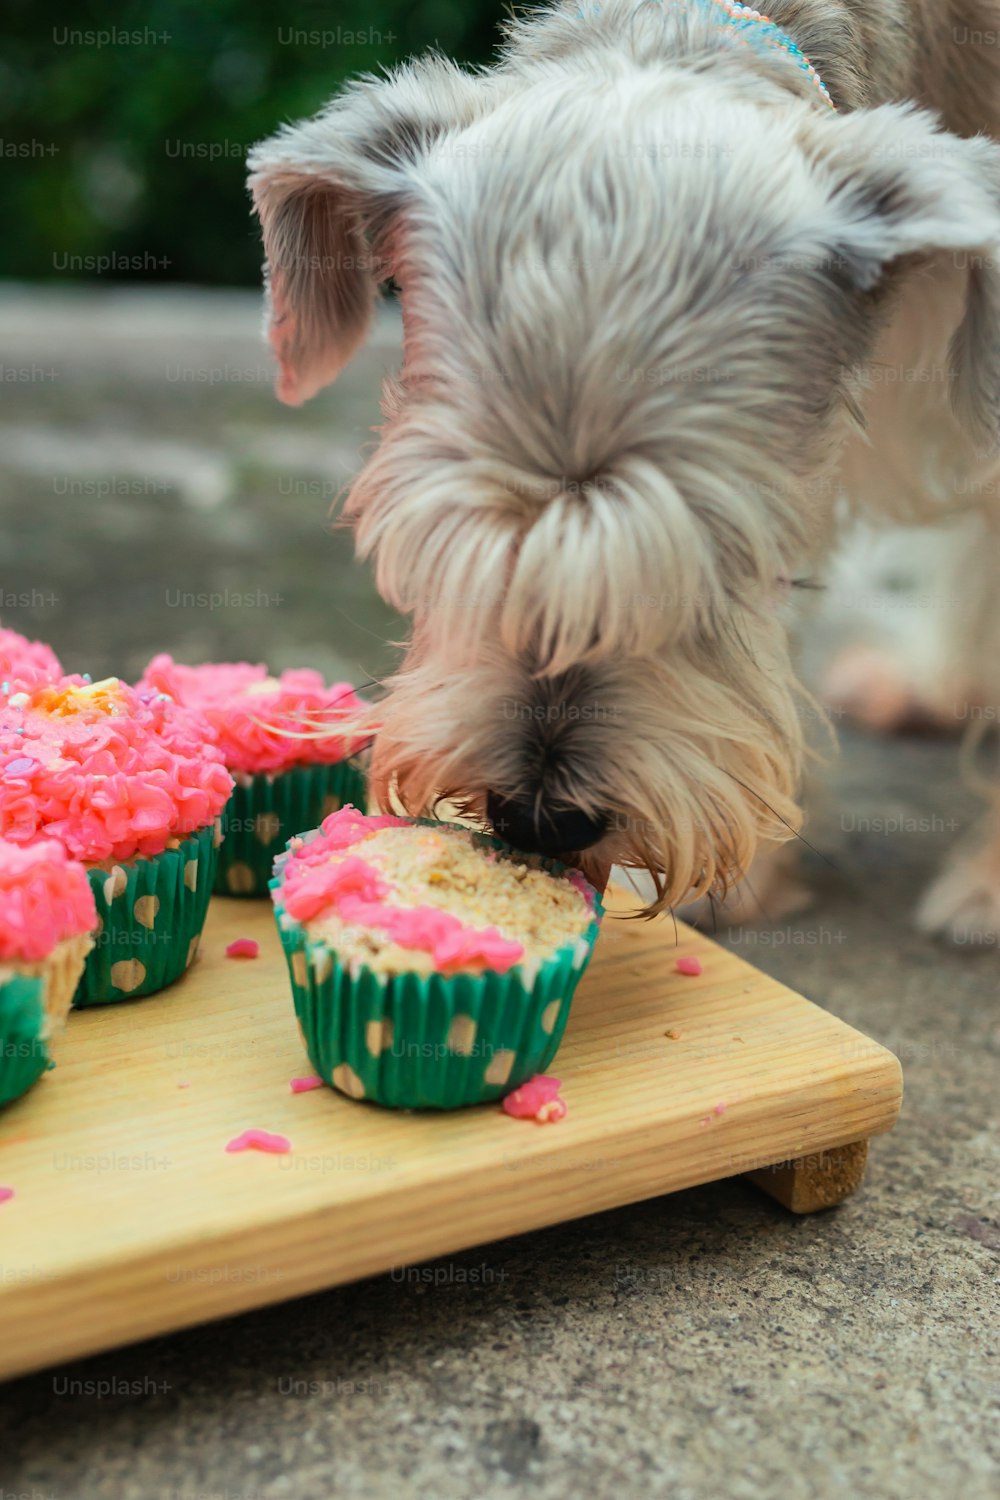 a small dog sniffing some cupcakes on a cutting board